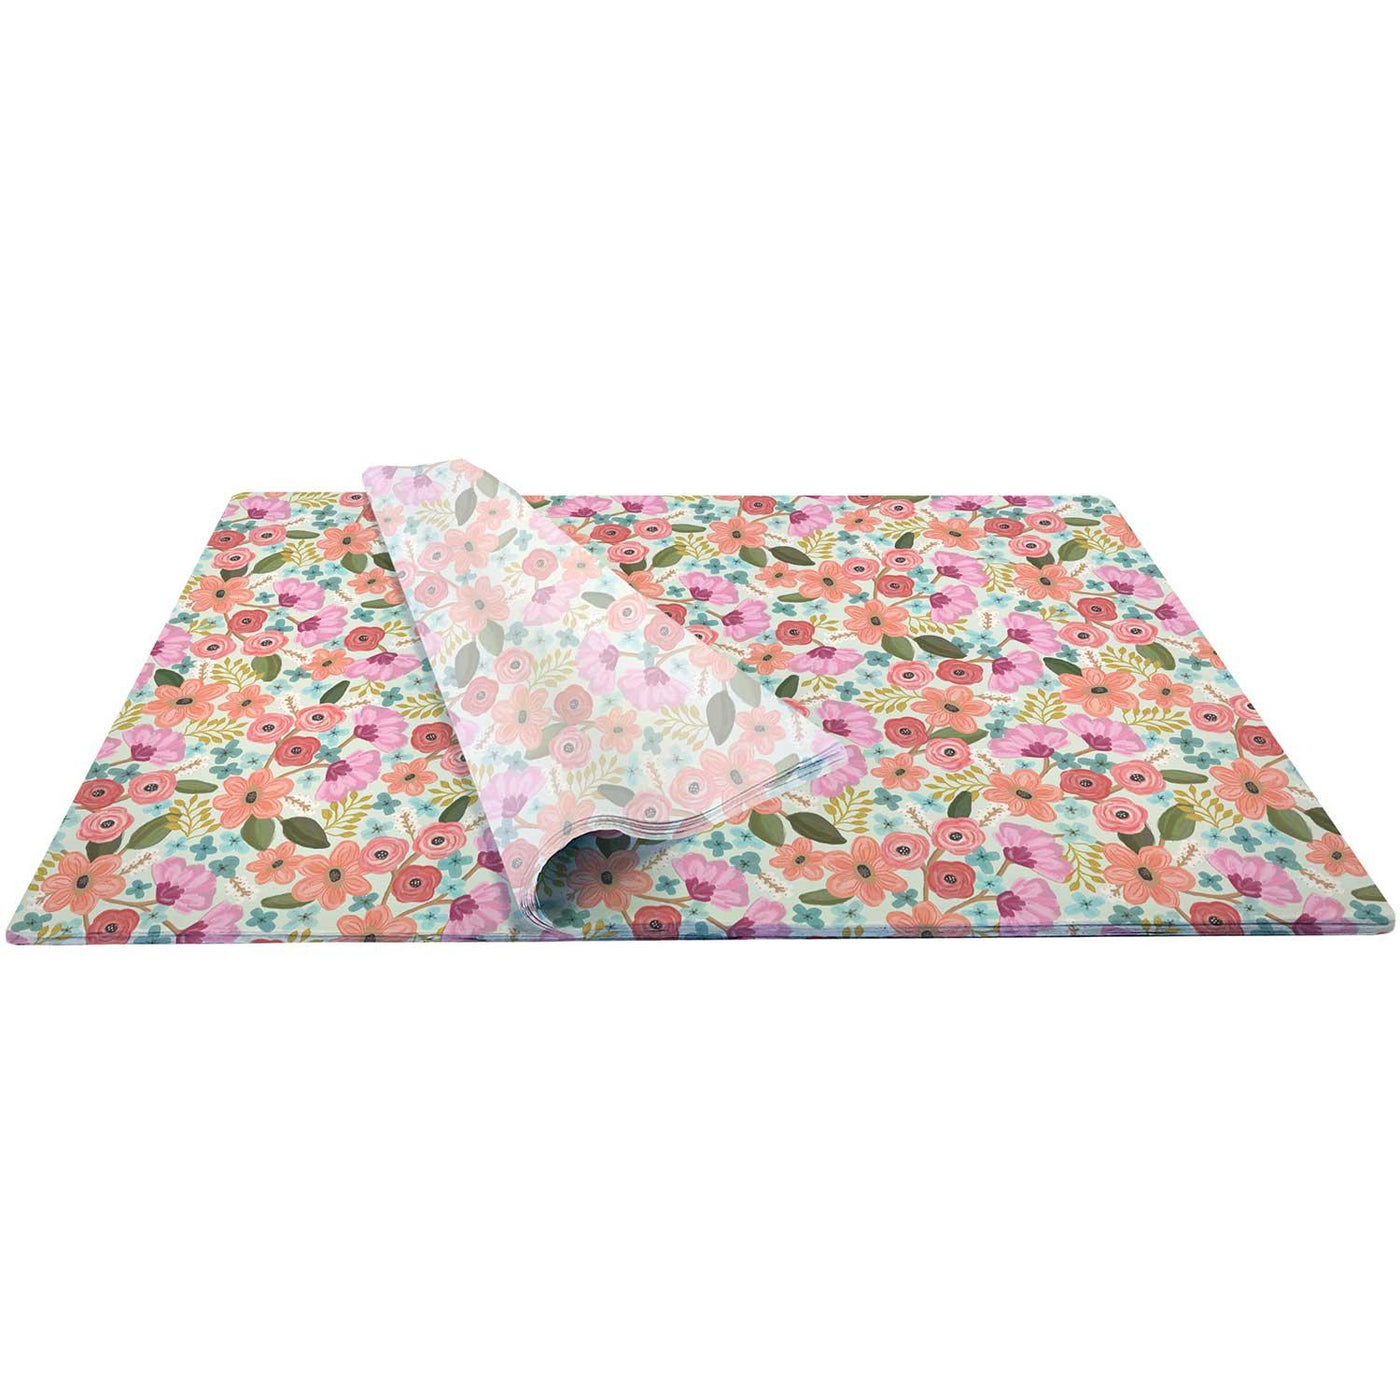 Gypsy Floral 20" x 30" Floral Gift Tissue Paper by Present Paper - Vysn